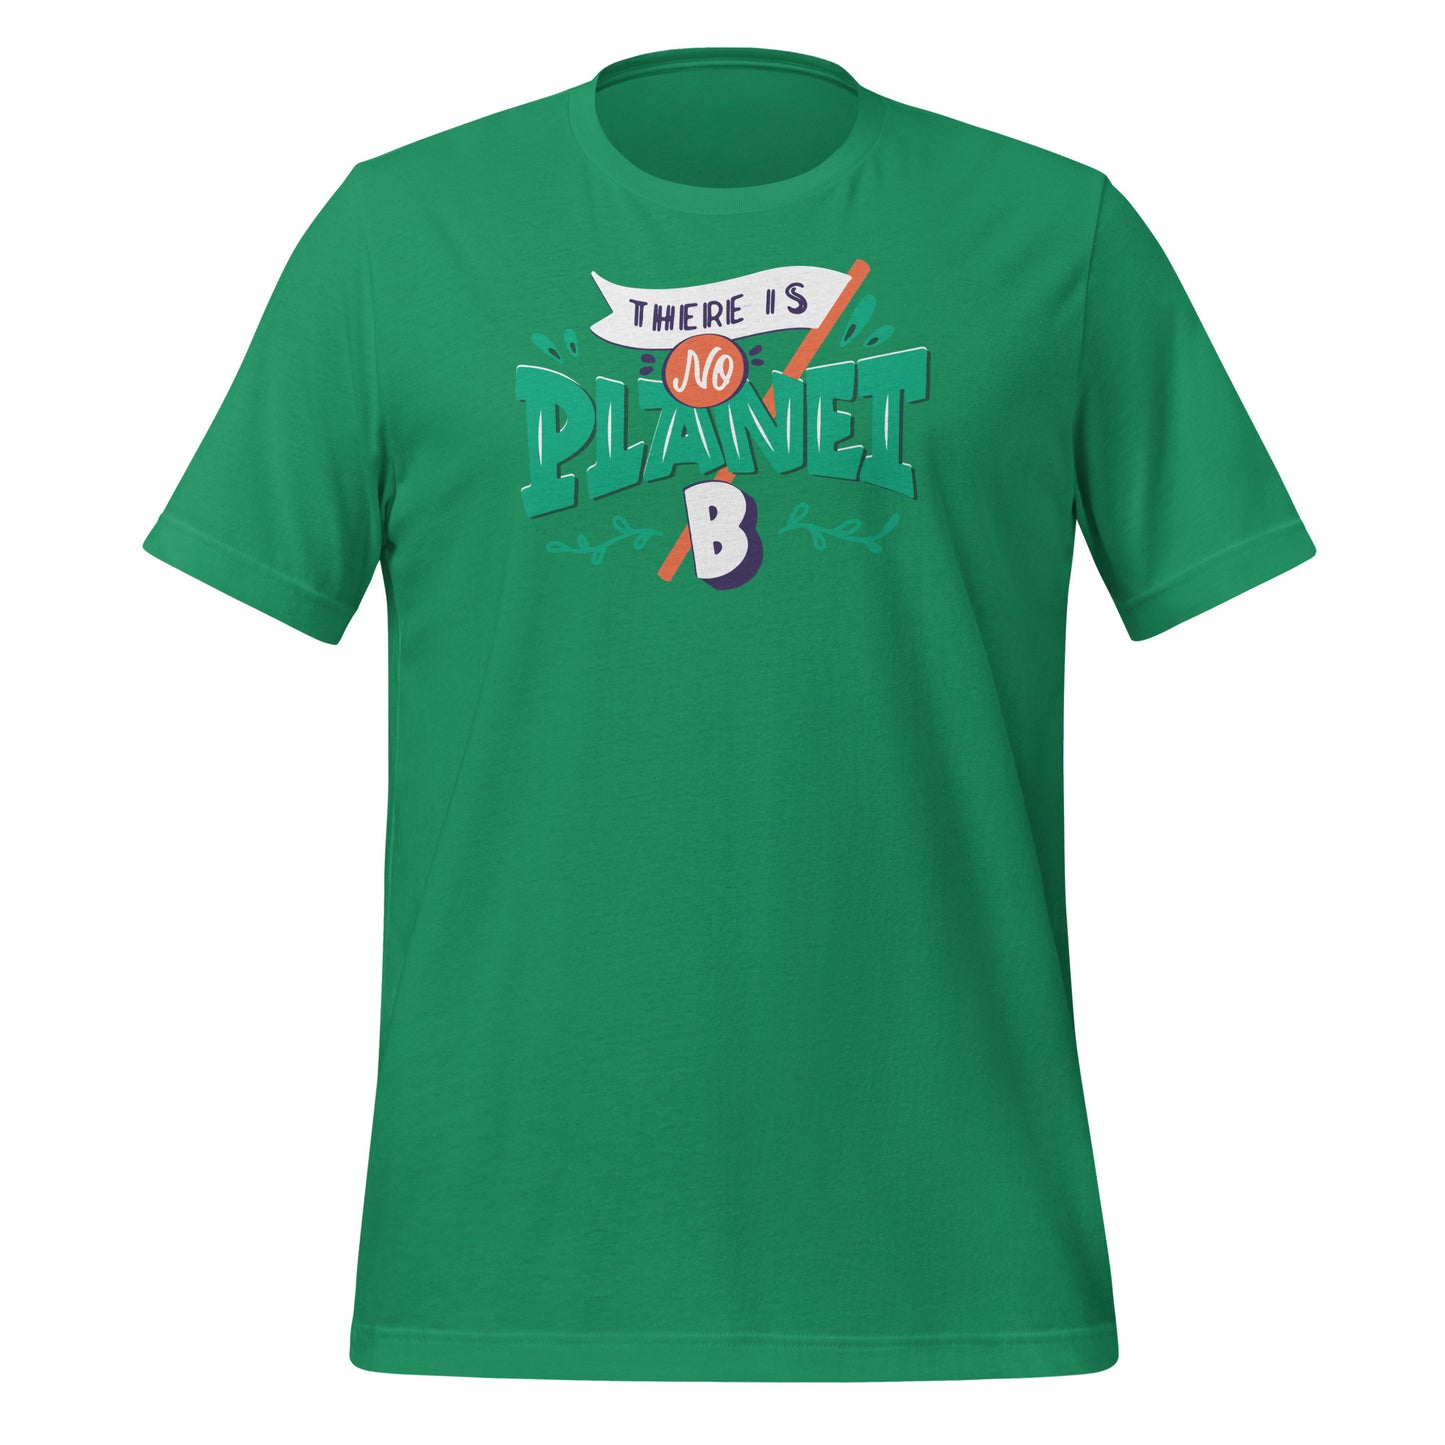 Show Your Eco-Conscious Style with Our 'There is No Planet B' T-Shirt